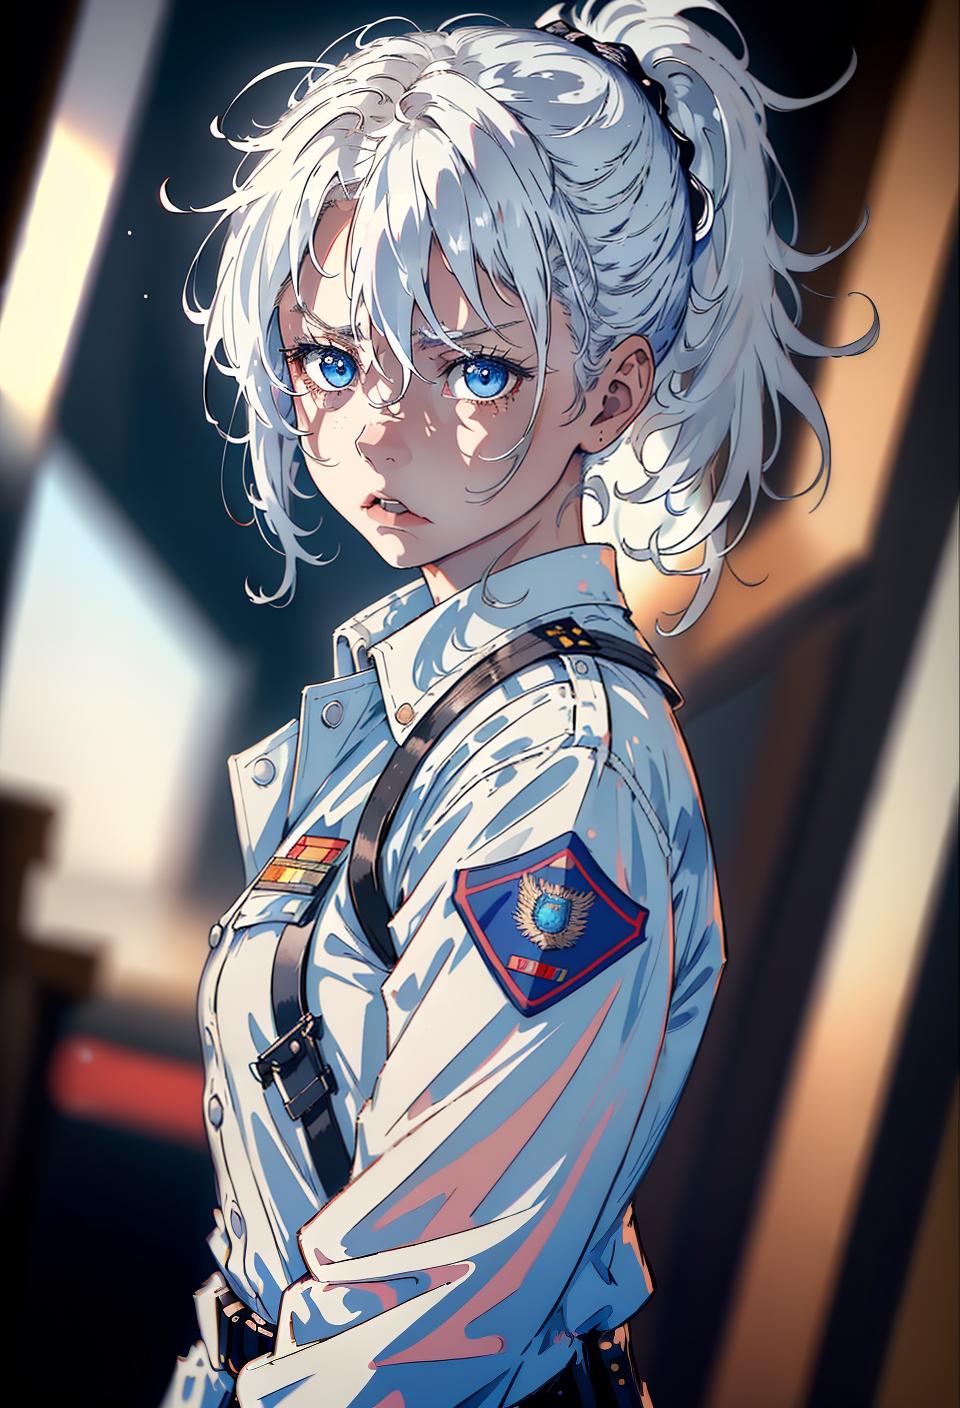  ((trending, highres, masterpiece, cinematic shot)), 1girl, young, female police uniform, Grand Canyon scene, medium-length messy white hair, short ponytail,  blue eyes, personality, angry expression, very pale skin, orderly, toned